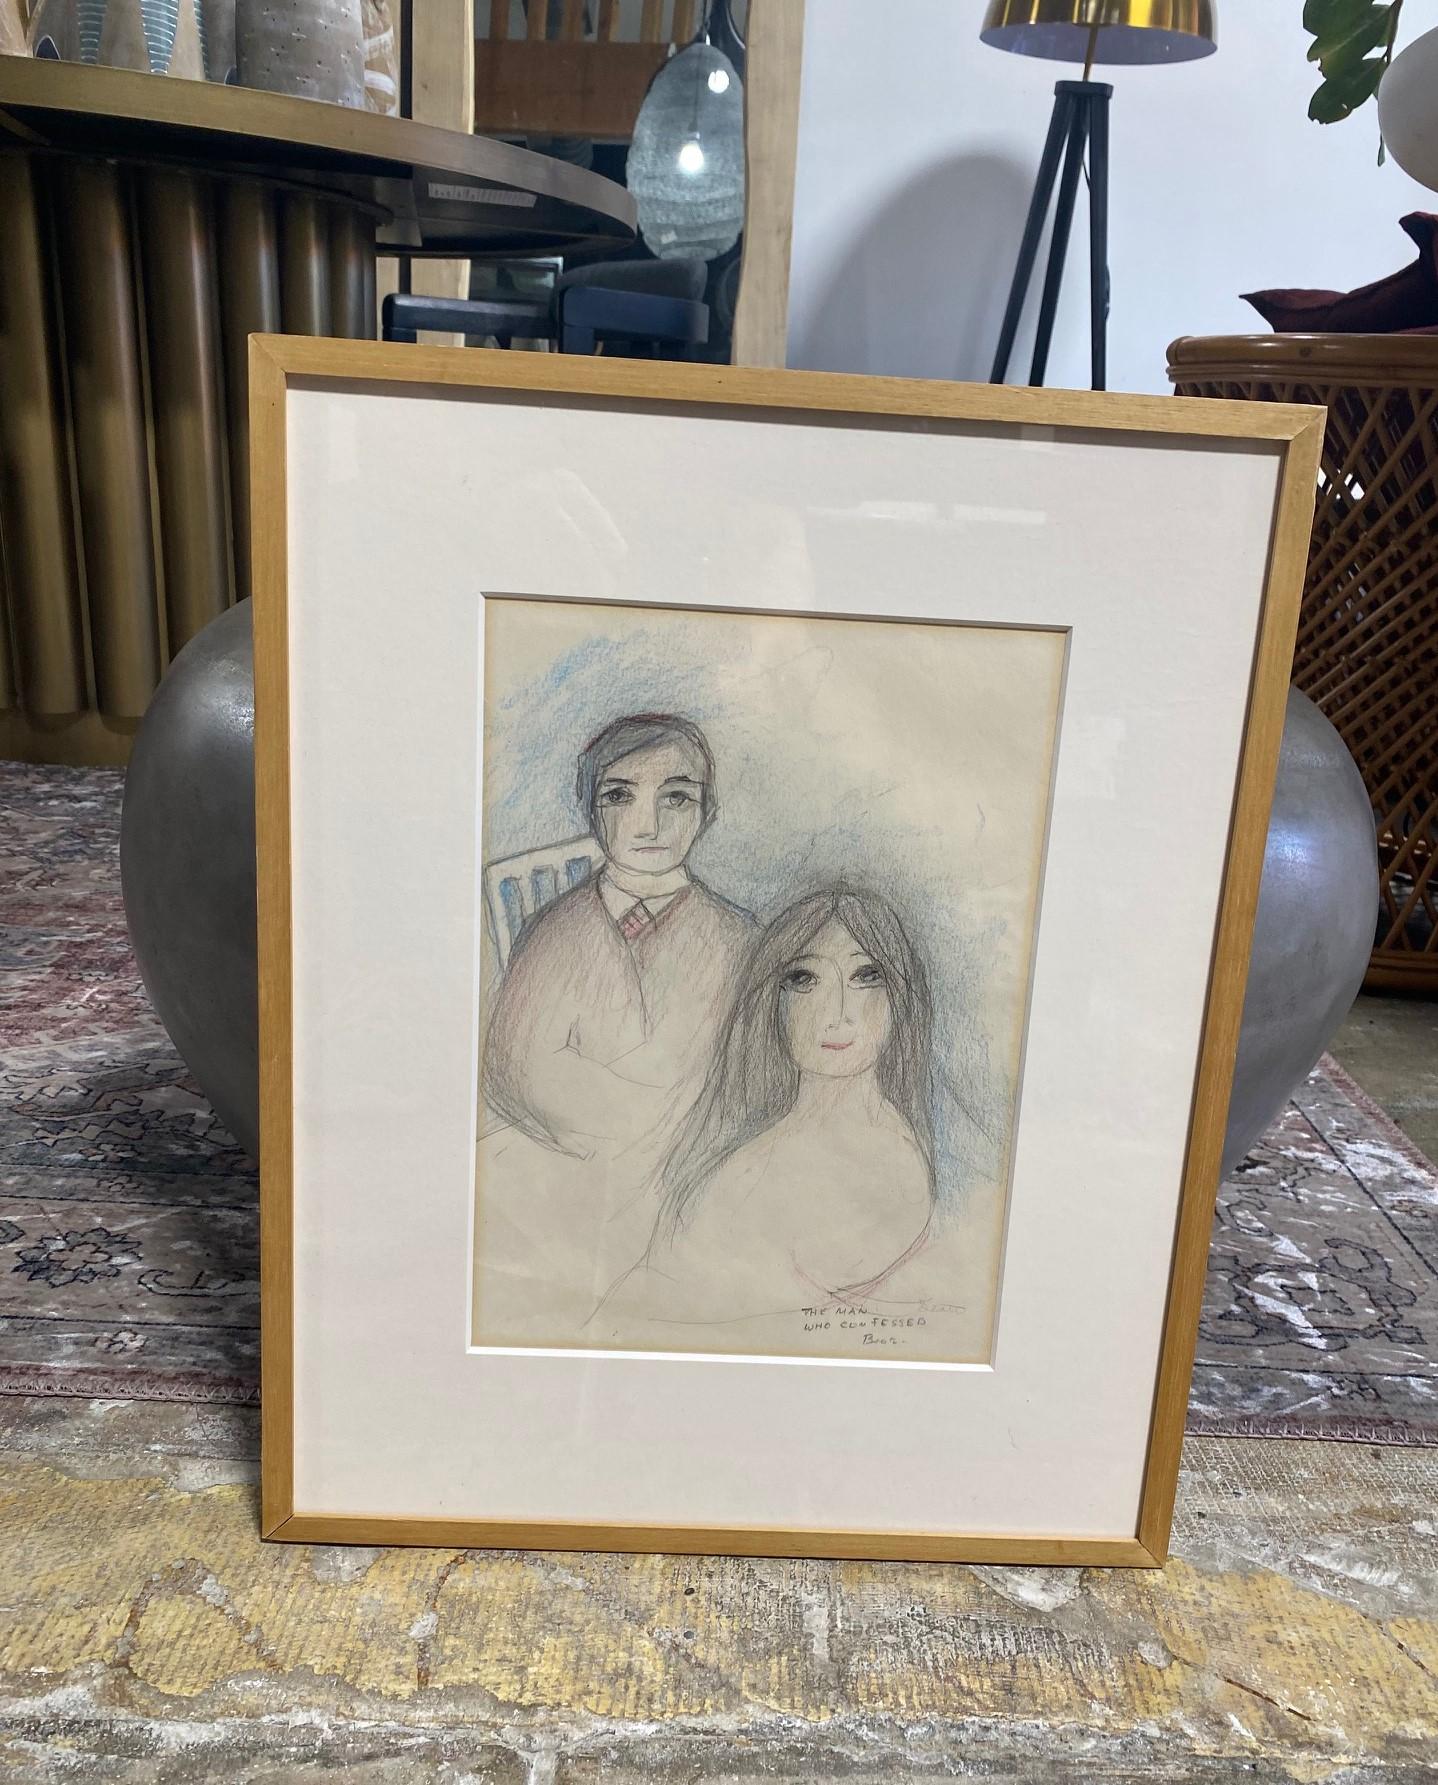 A wonderful original pastel and graphite/ color pencil on paper drawing by famed California artist and ceramist Beatrice Wood. This piece is titled 